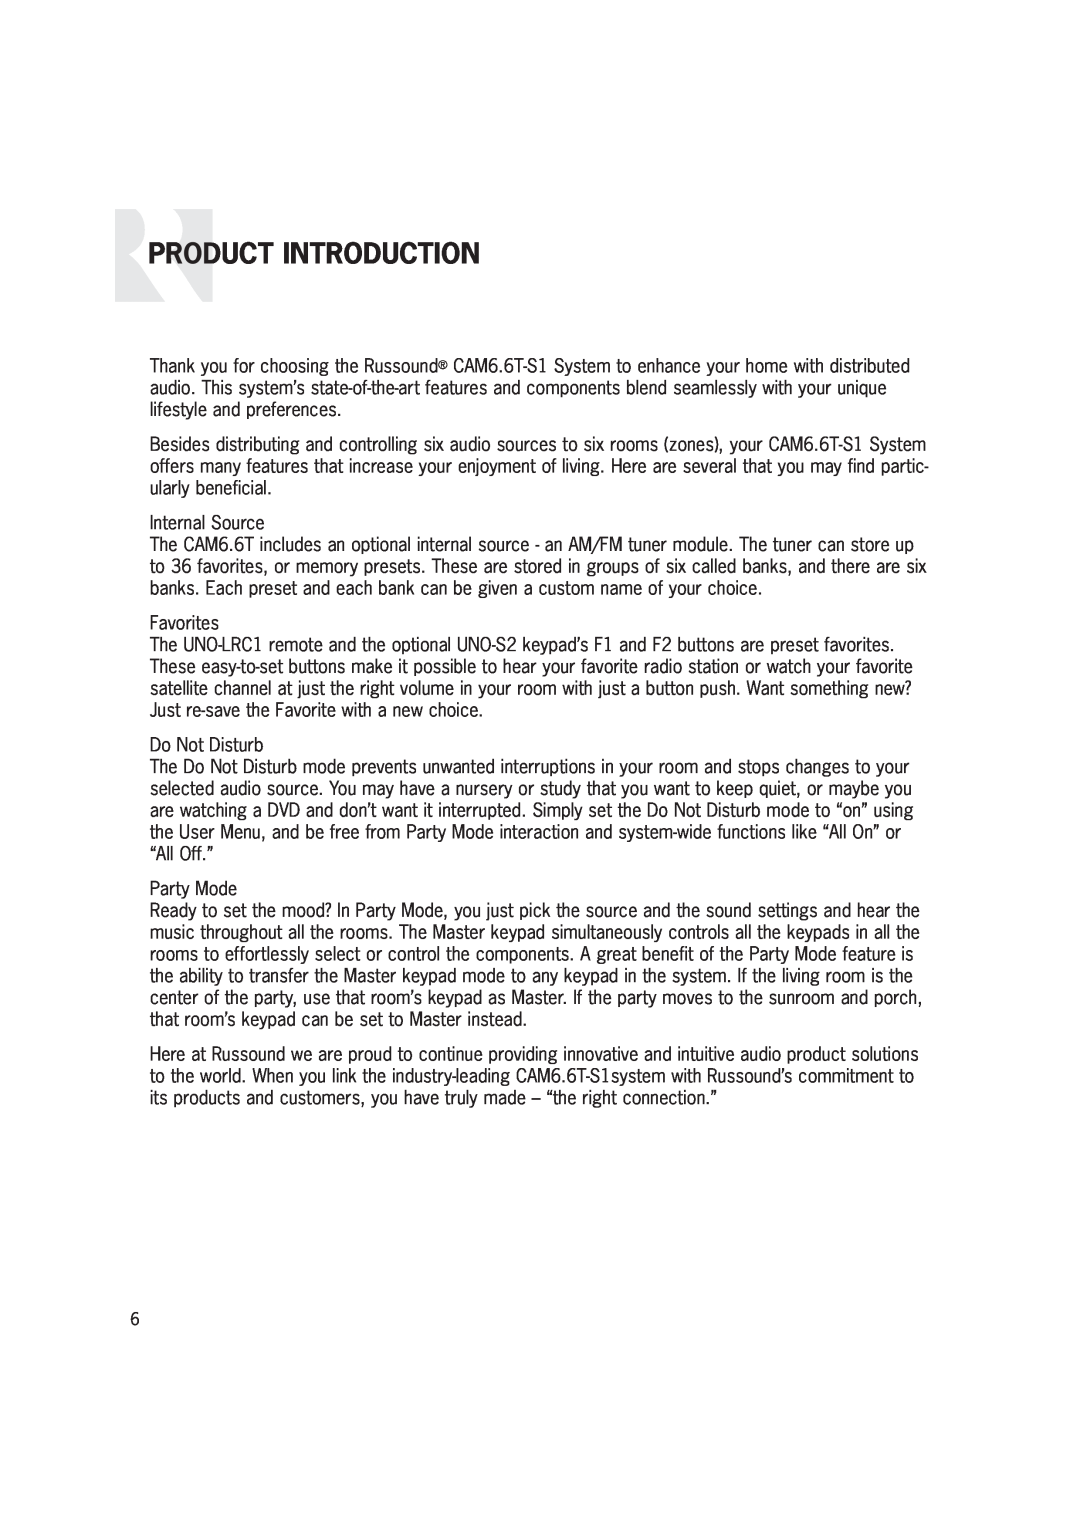 Russound CAM6.6T-S1 instruction manual Product Introduction 